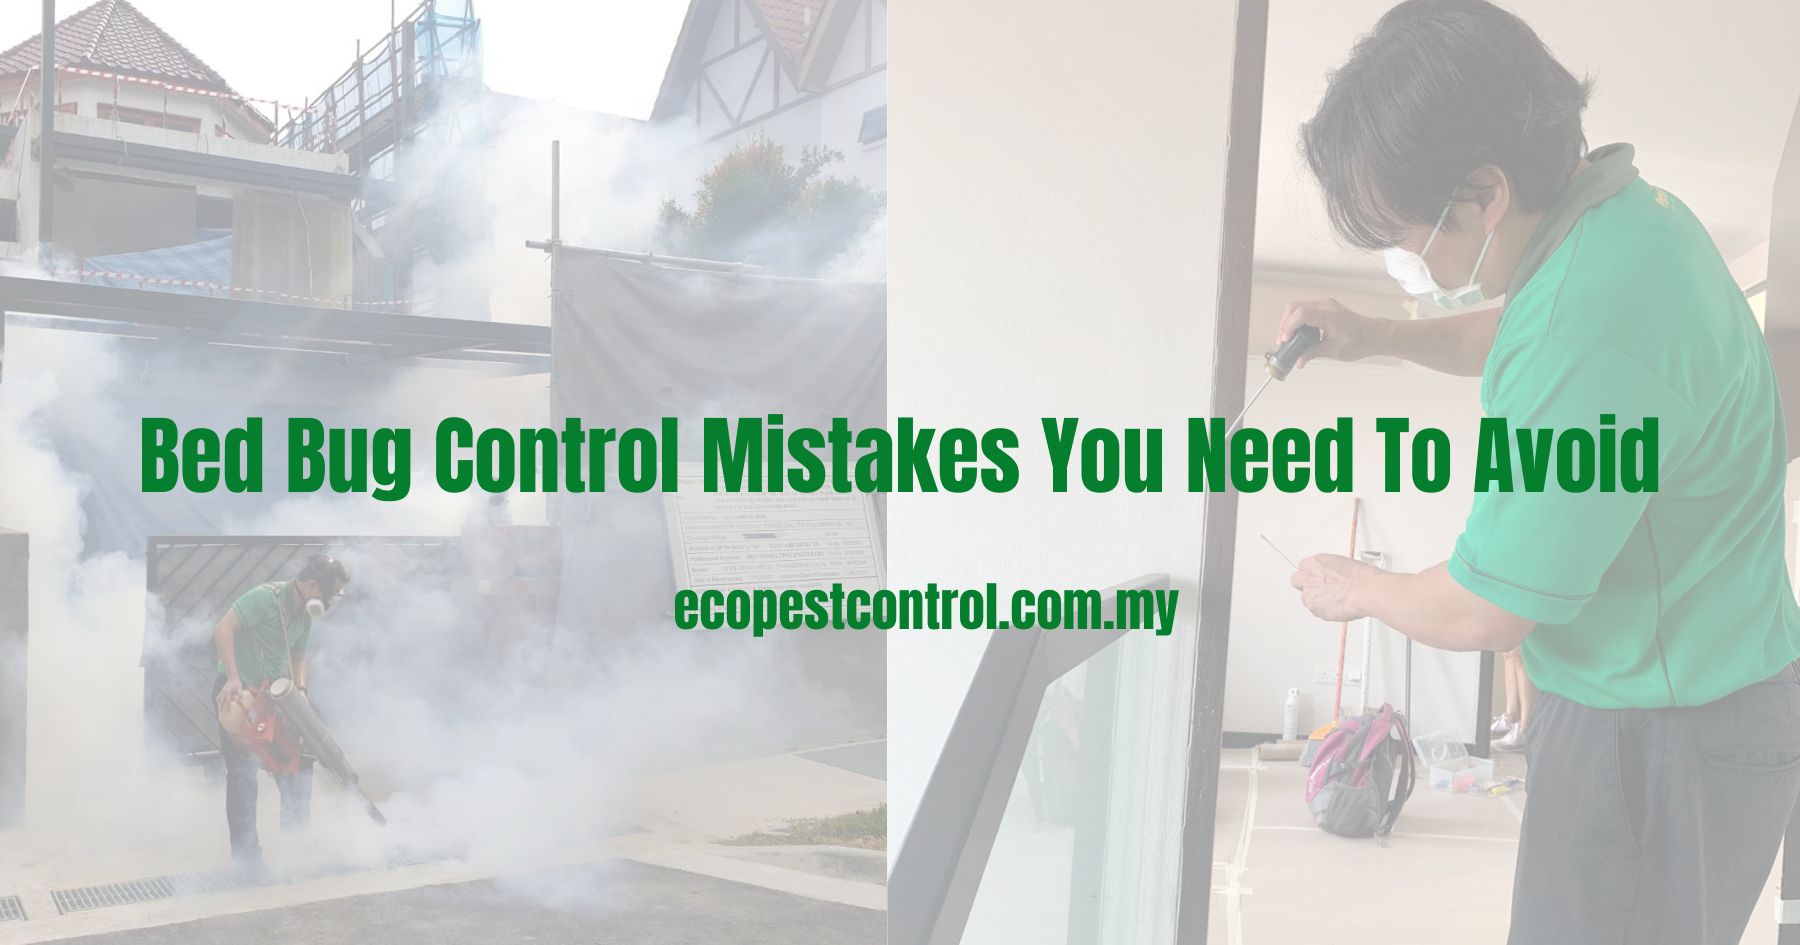 Bed Bug Control Mistakes You Need To Avoid